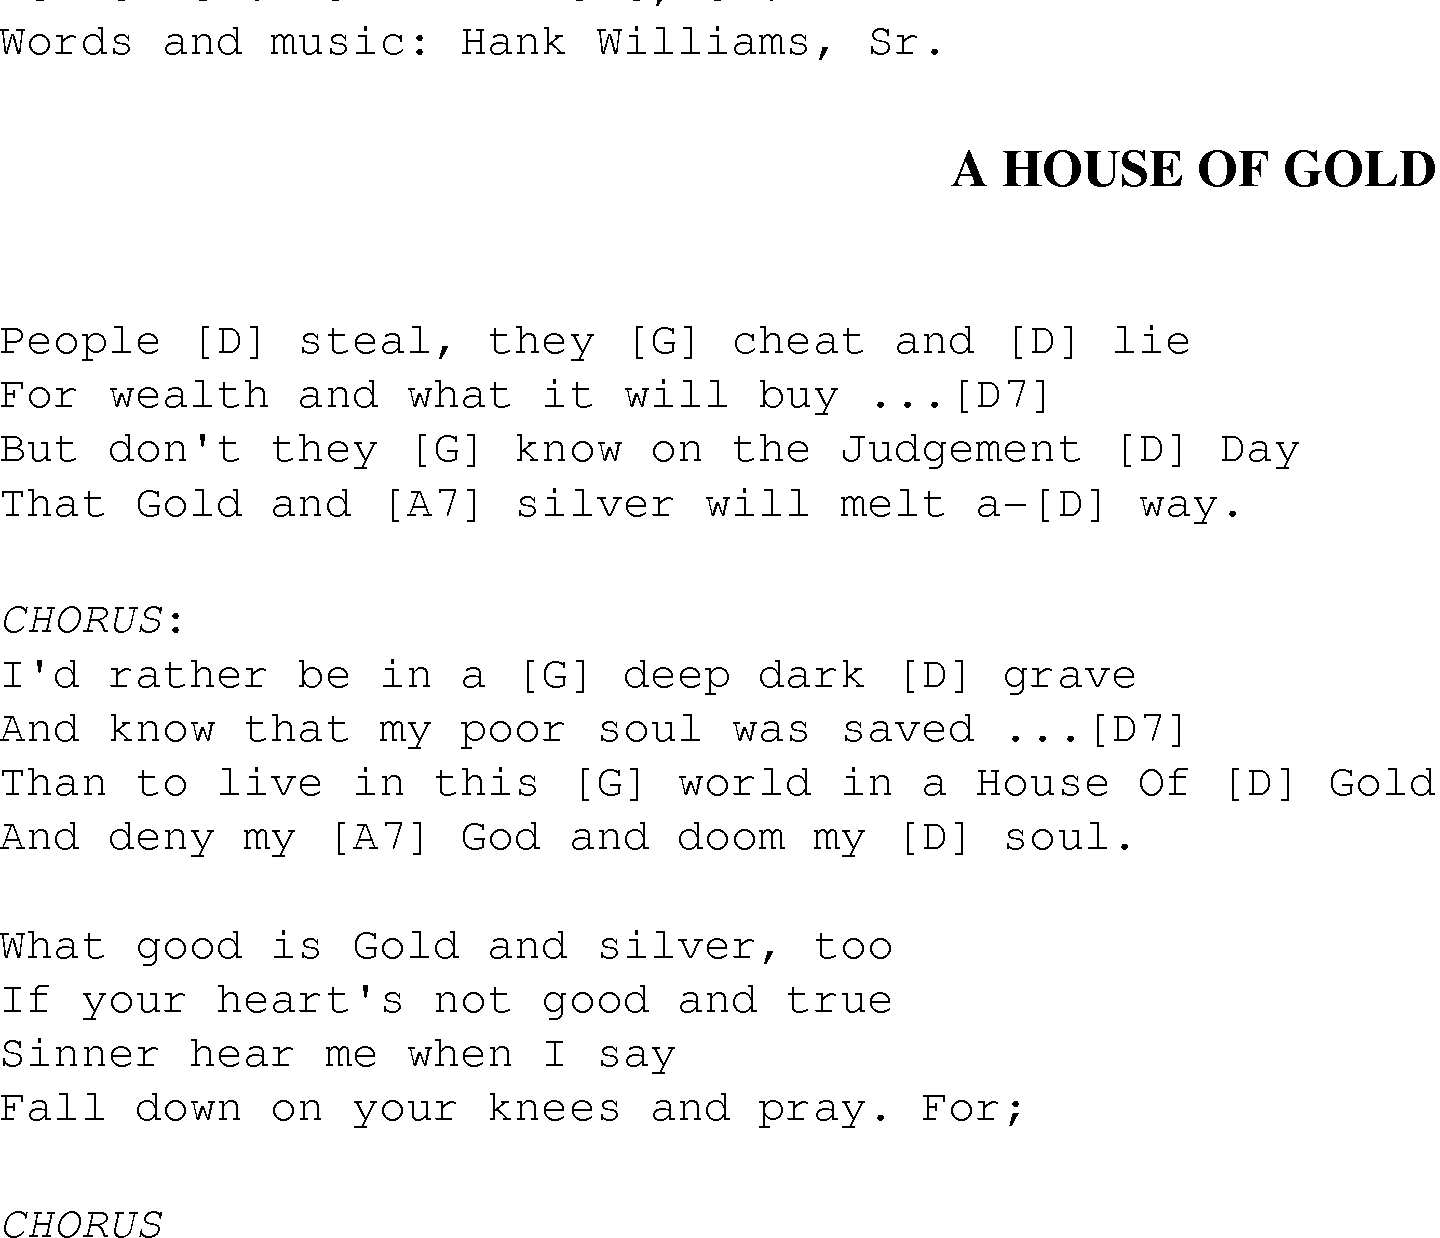 Heart Of Gold Chords A House Of Gold Christian Gospel Song Lyrics And Chords